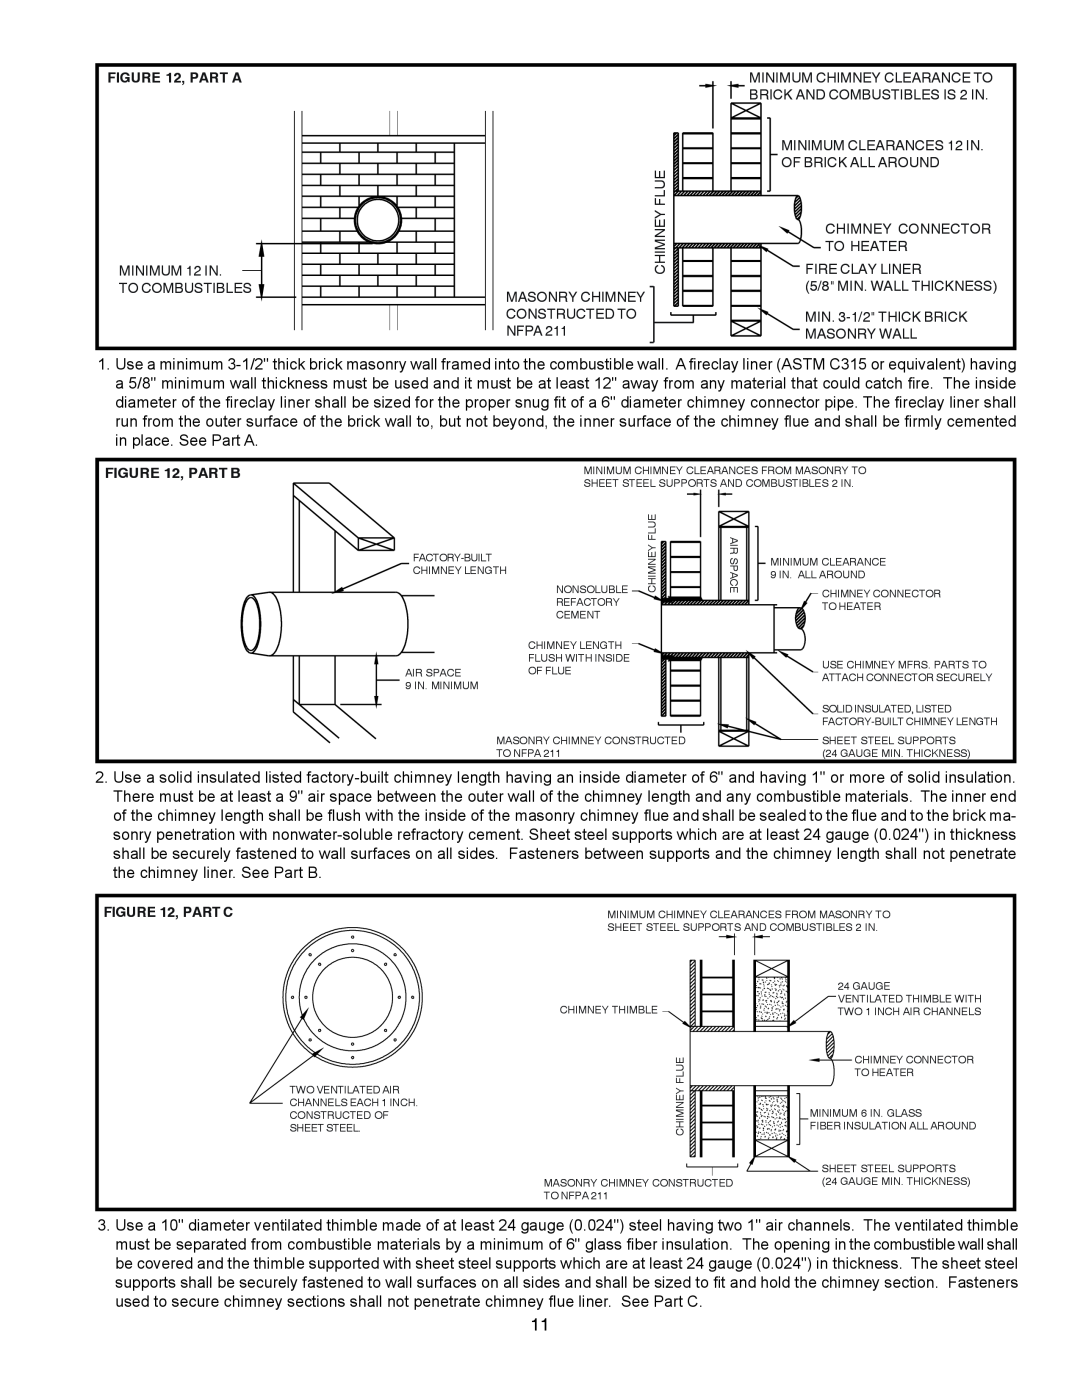 United States Stove 1357M Part A, MINIMUM 12 IN TO COMBUSTIBLES, Chimney Flue Masonry Chimney Constructed To Nfpa, Part B 